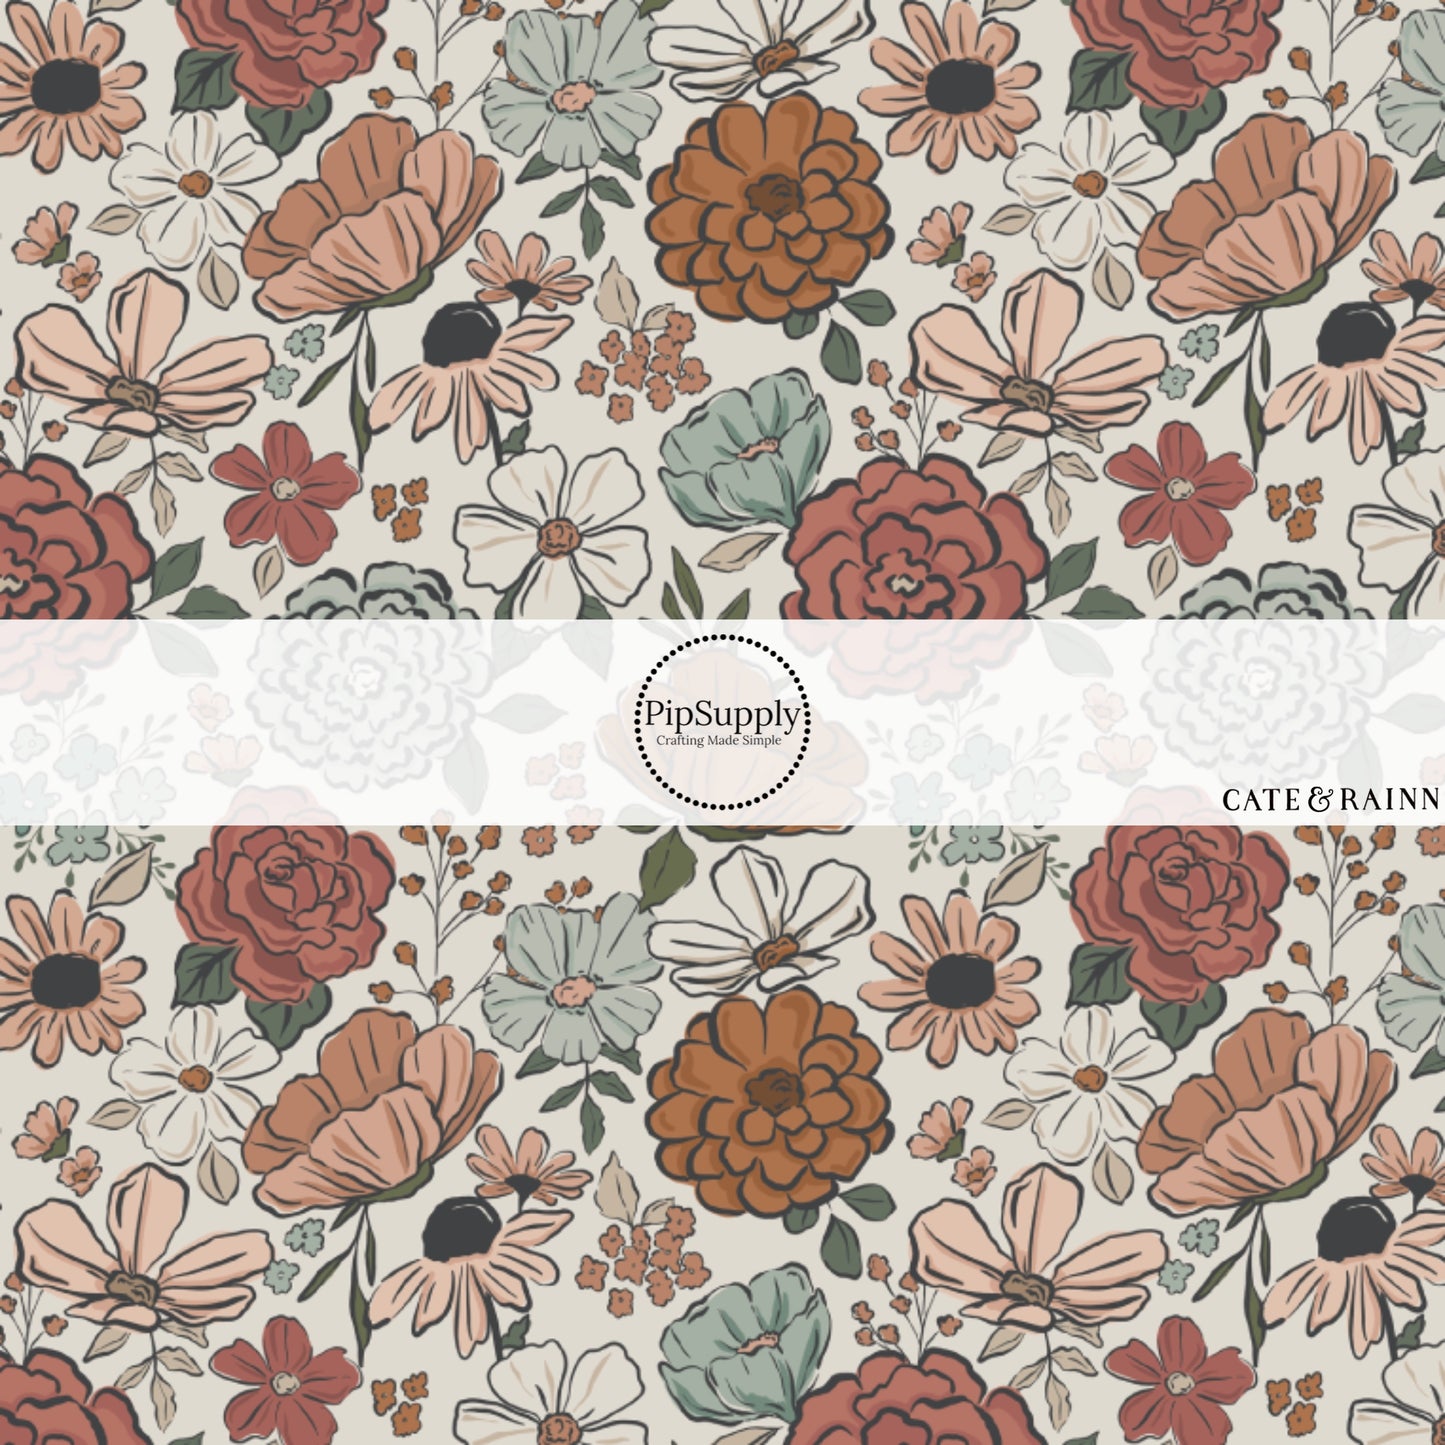 These summer pattern fabric by the yard features western floral patterns. This fun fabric can be used for all your sewing and crafting needs!